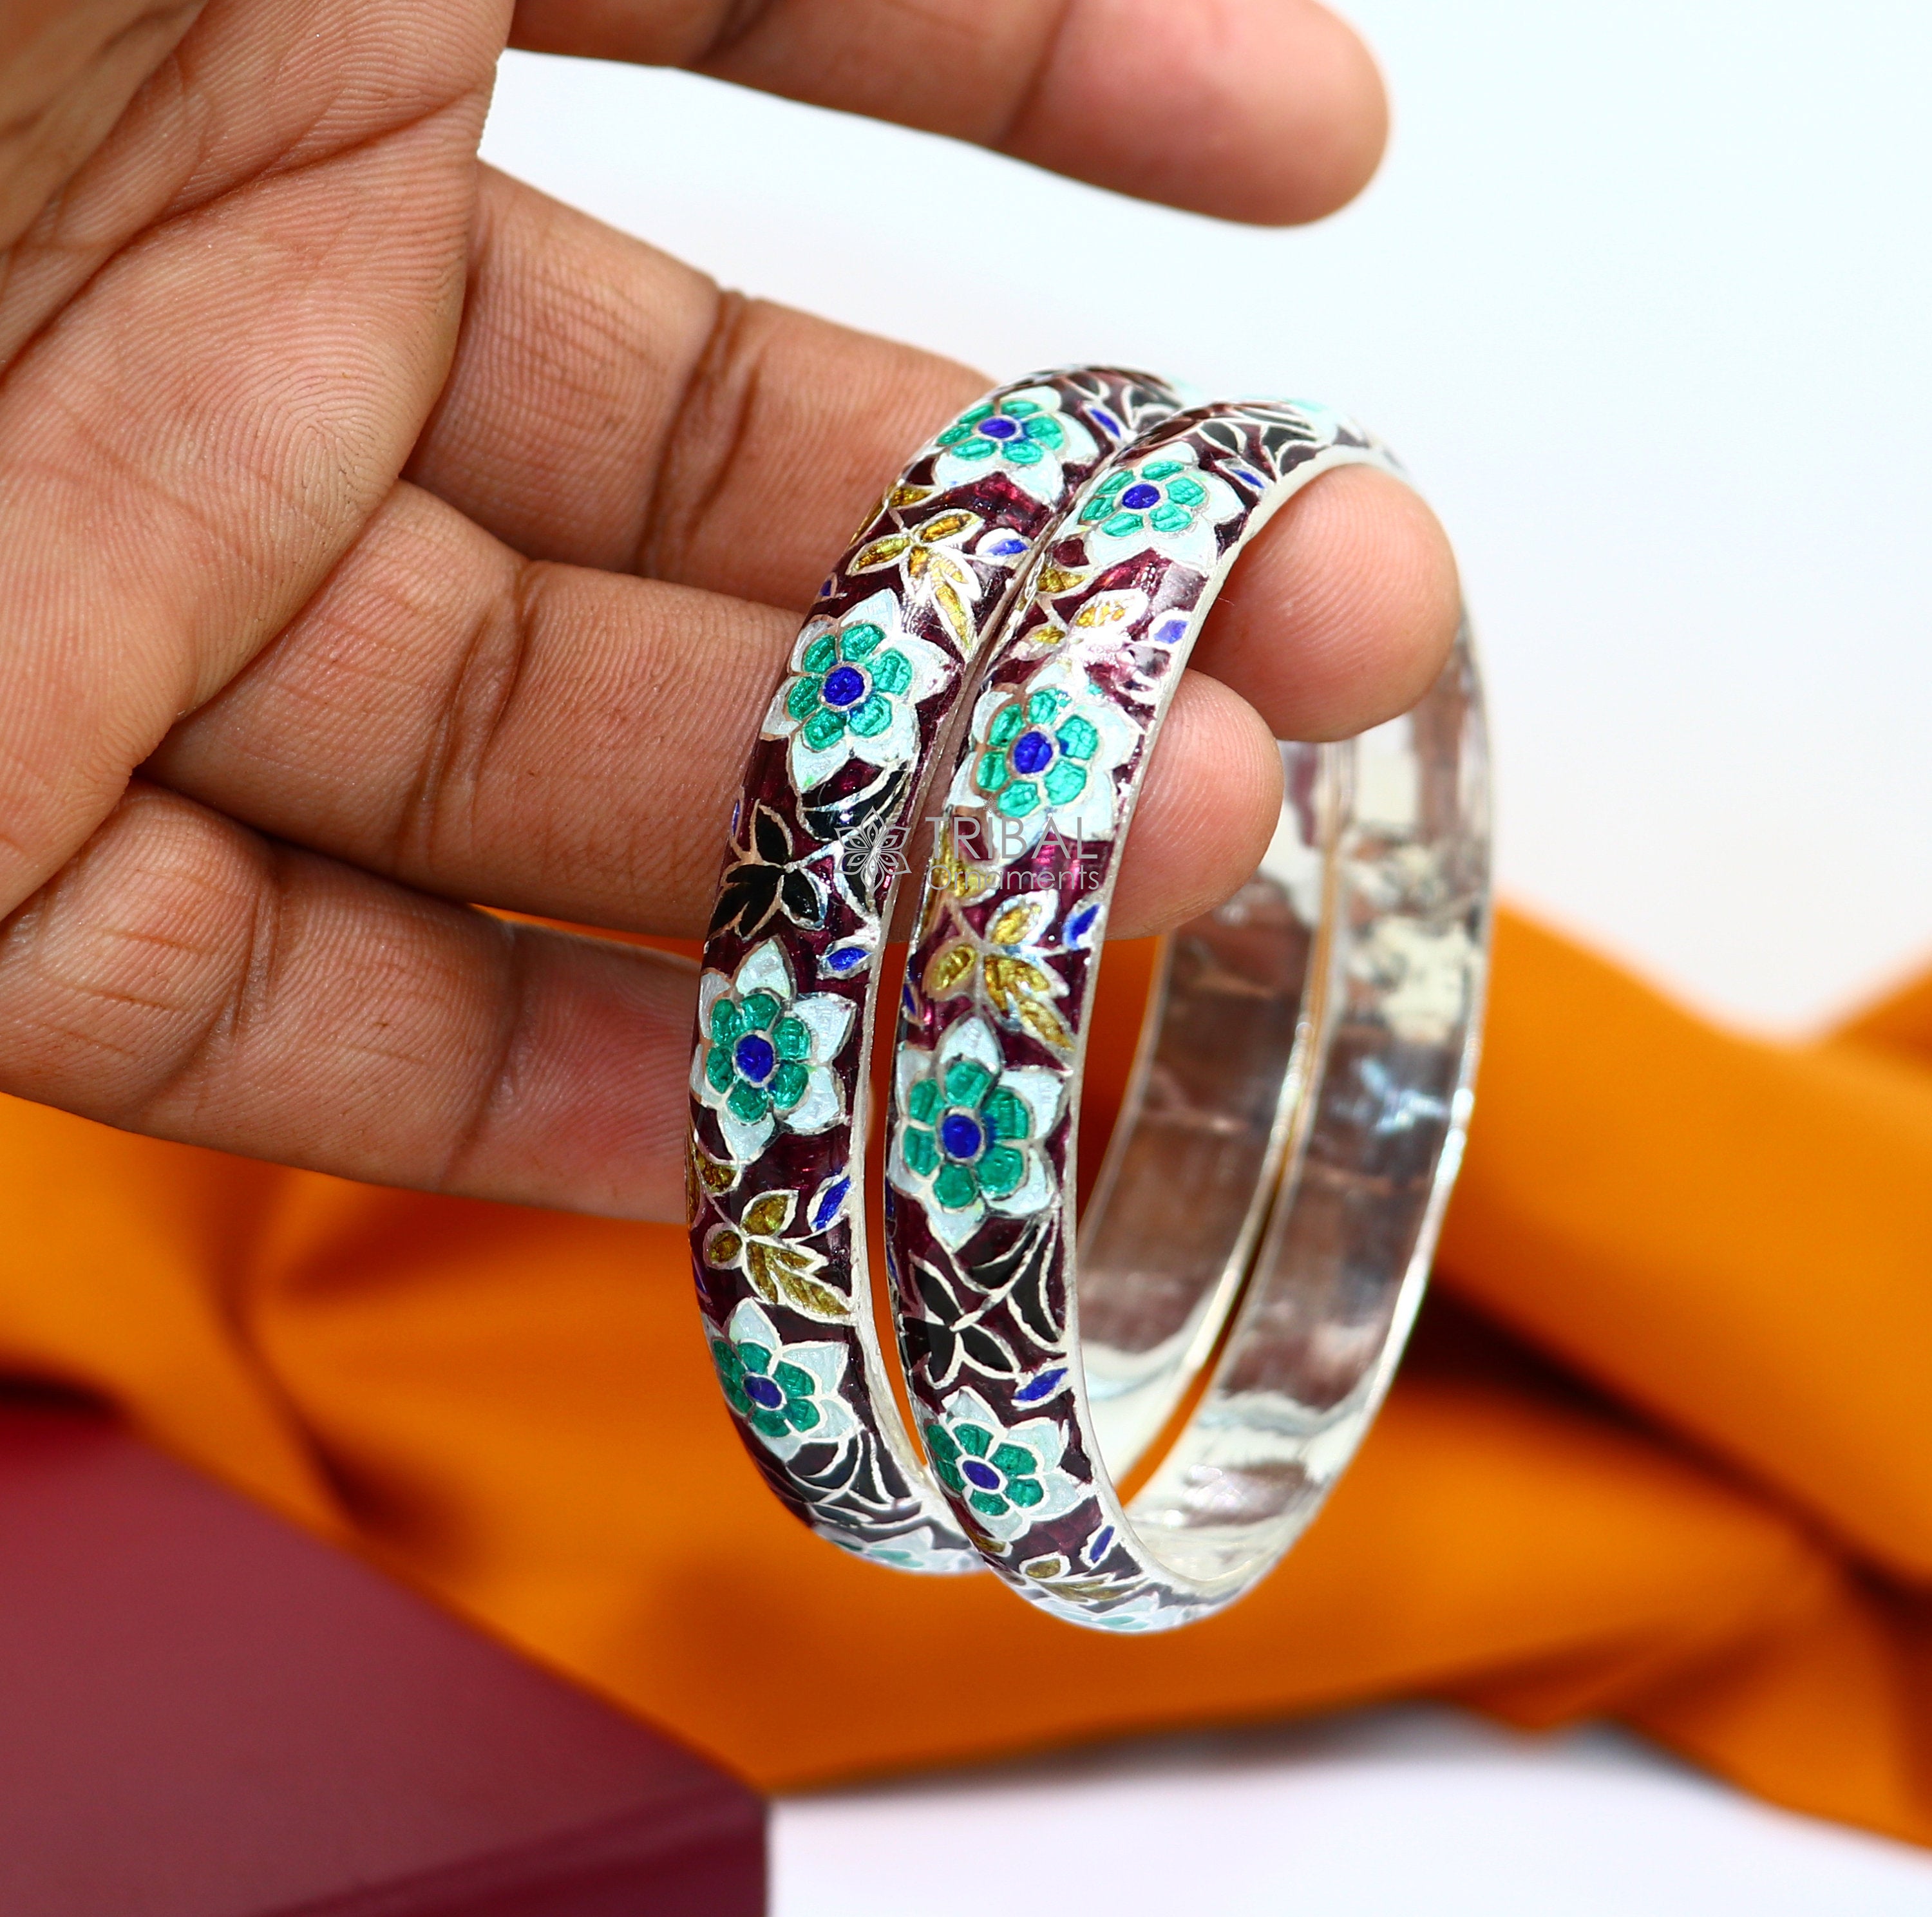 Buy Fabulous Flower Bangle 925 Solid Sterling Silver Bangle Size 2.25  Inches inside Diameter Flower Bracelet Indian Ethnic Jewelry Online in India  - Etsy